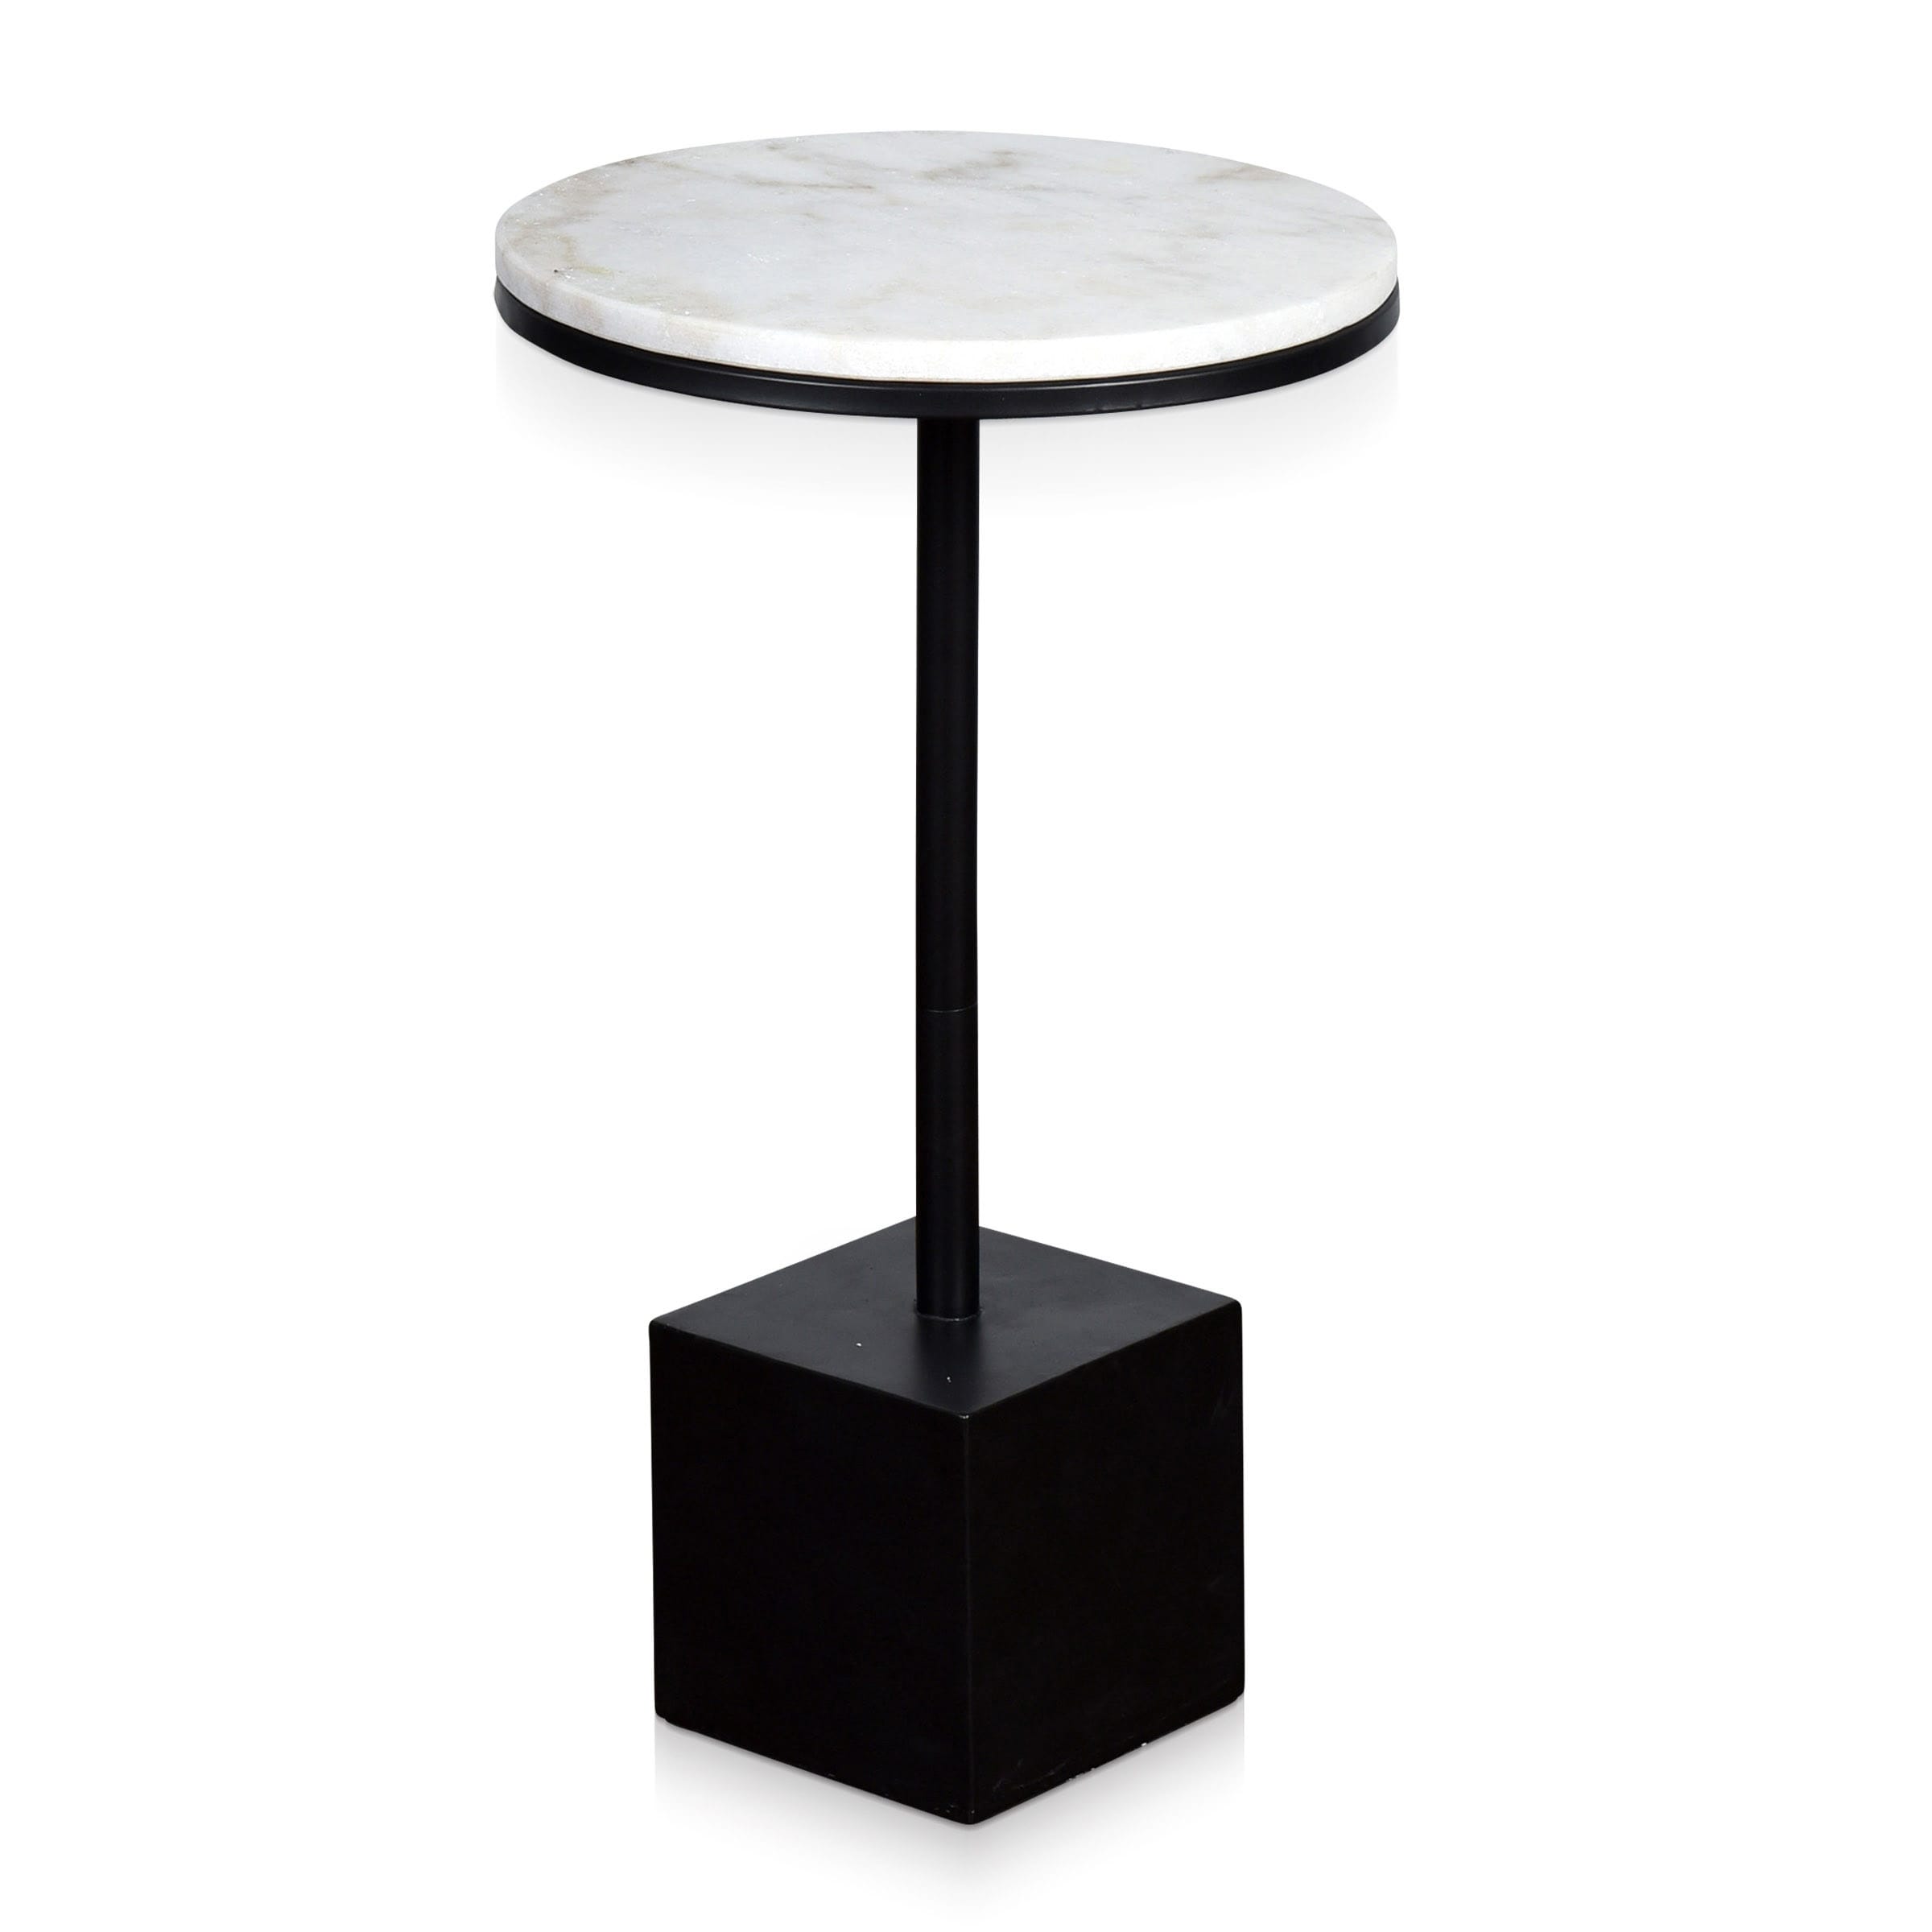 StyleCraft White and Black Round Marble Top Accent Table with Square Pedestal Base - -